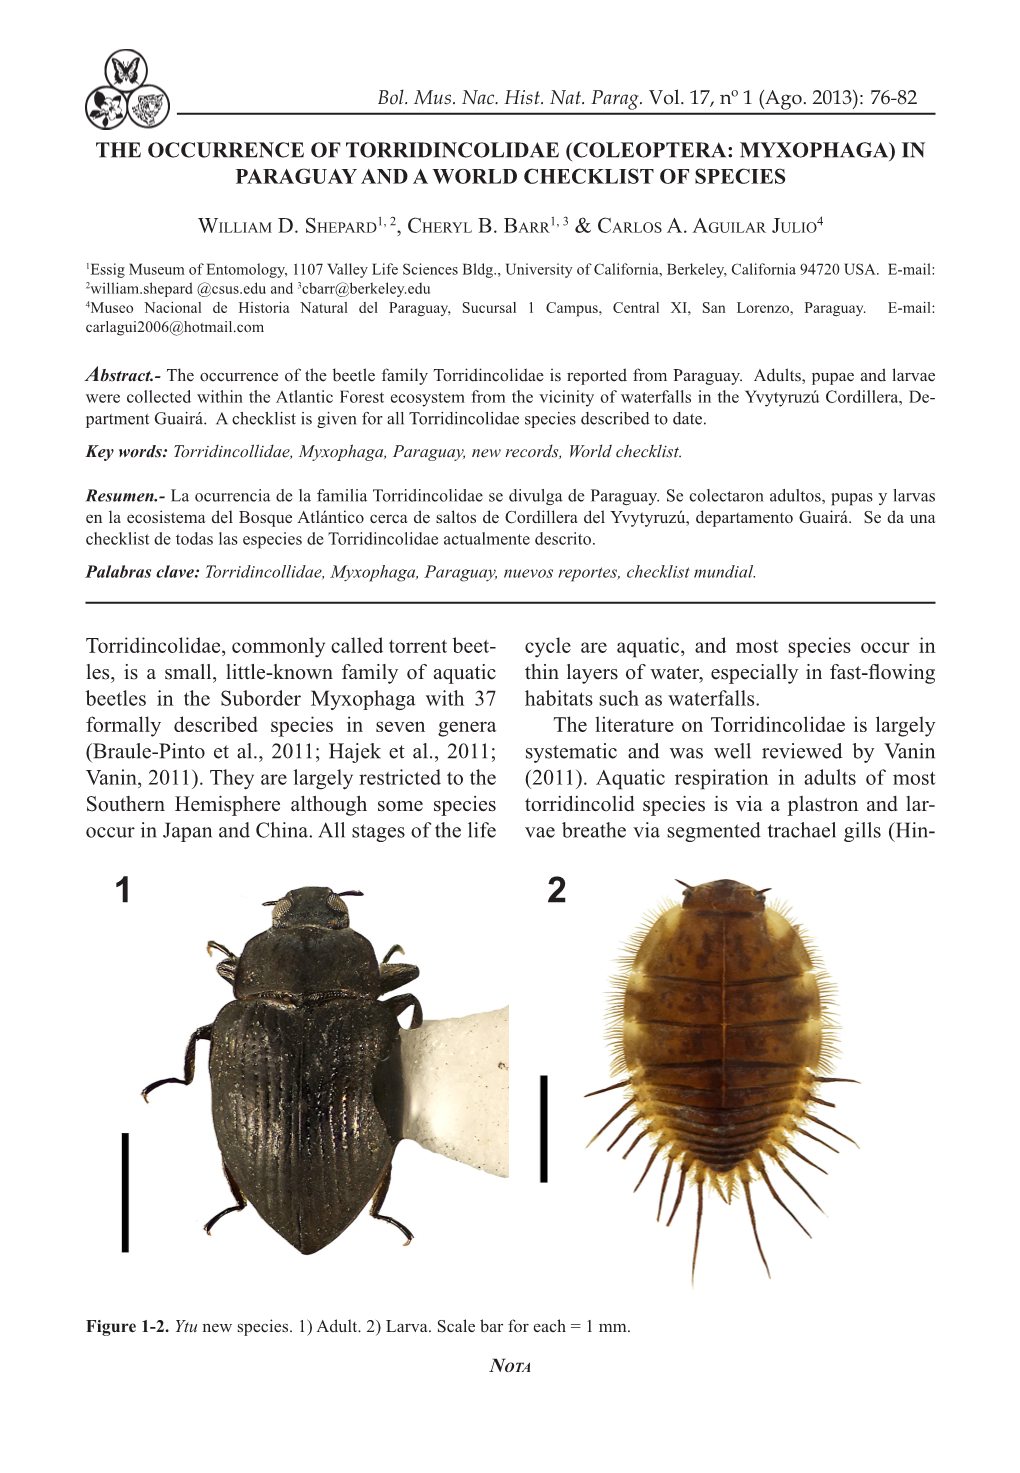 Coleoptera: Myxophaga) in Paraguay and a World Checklist of Species